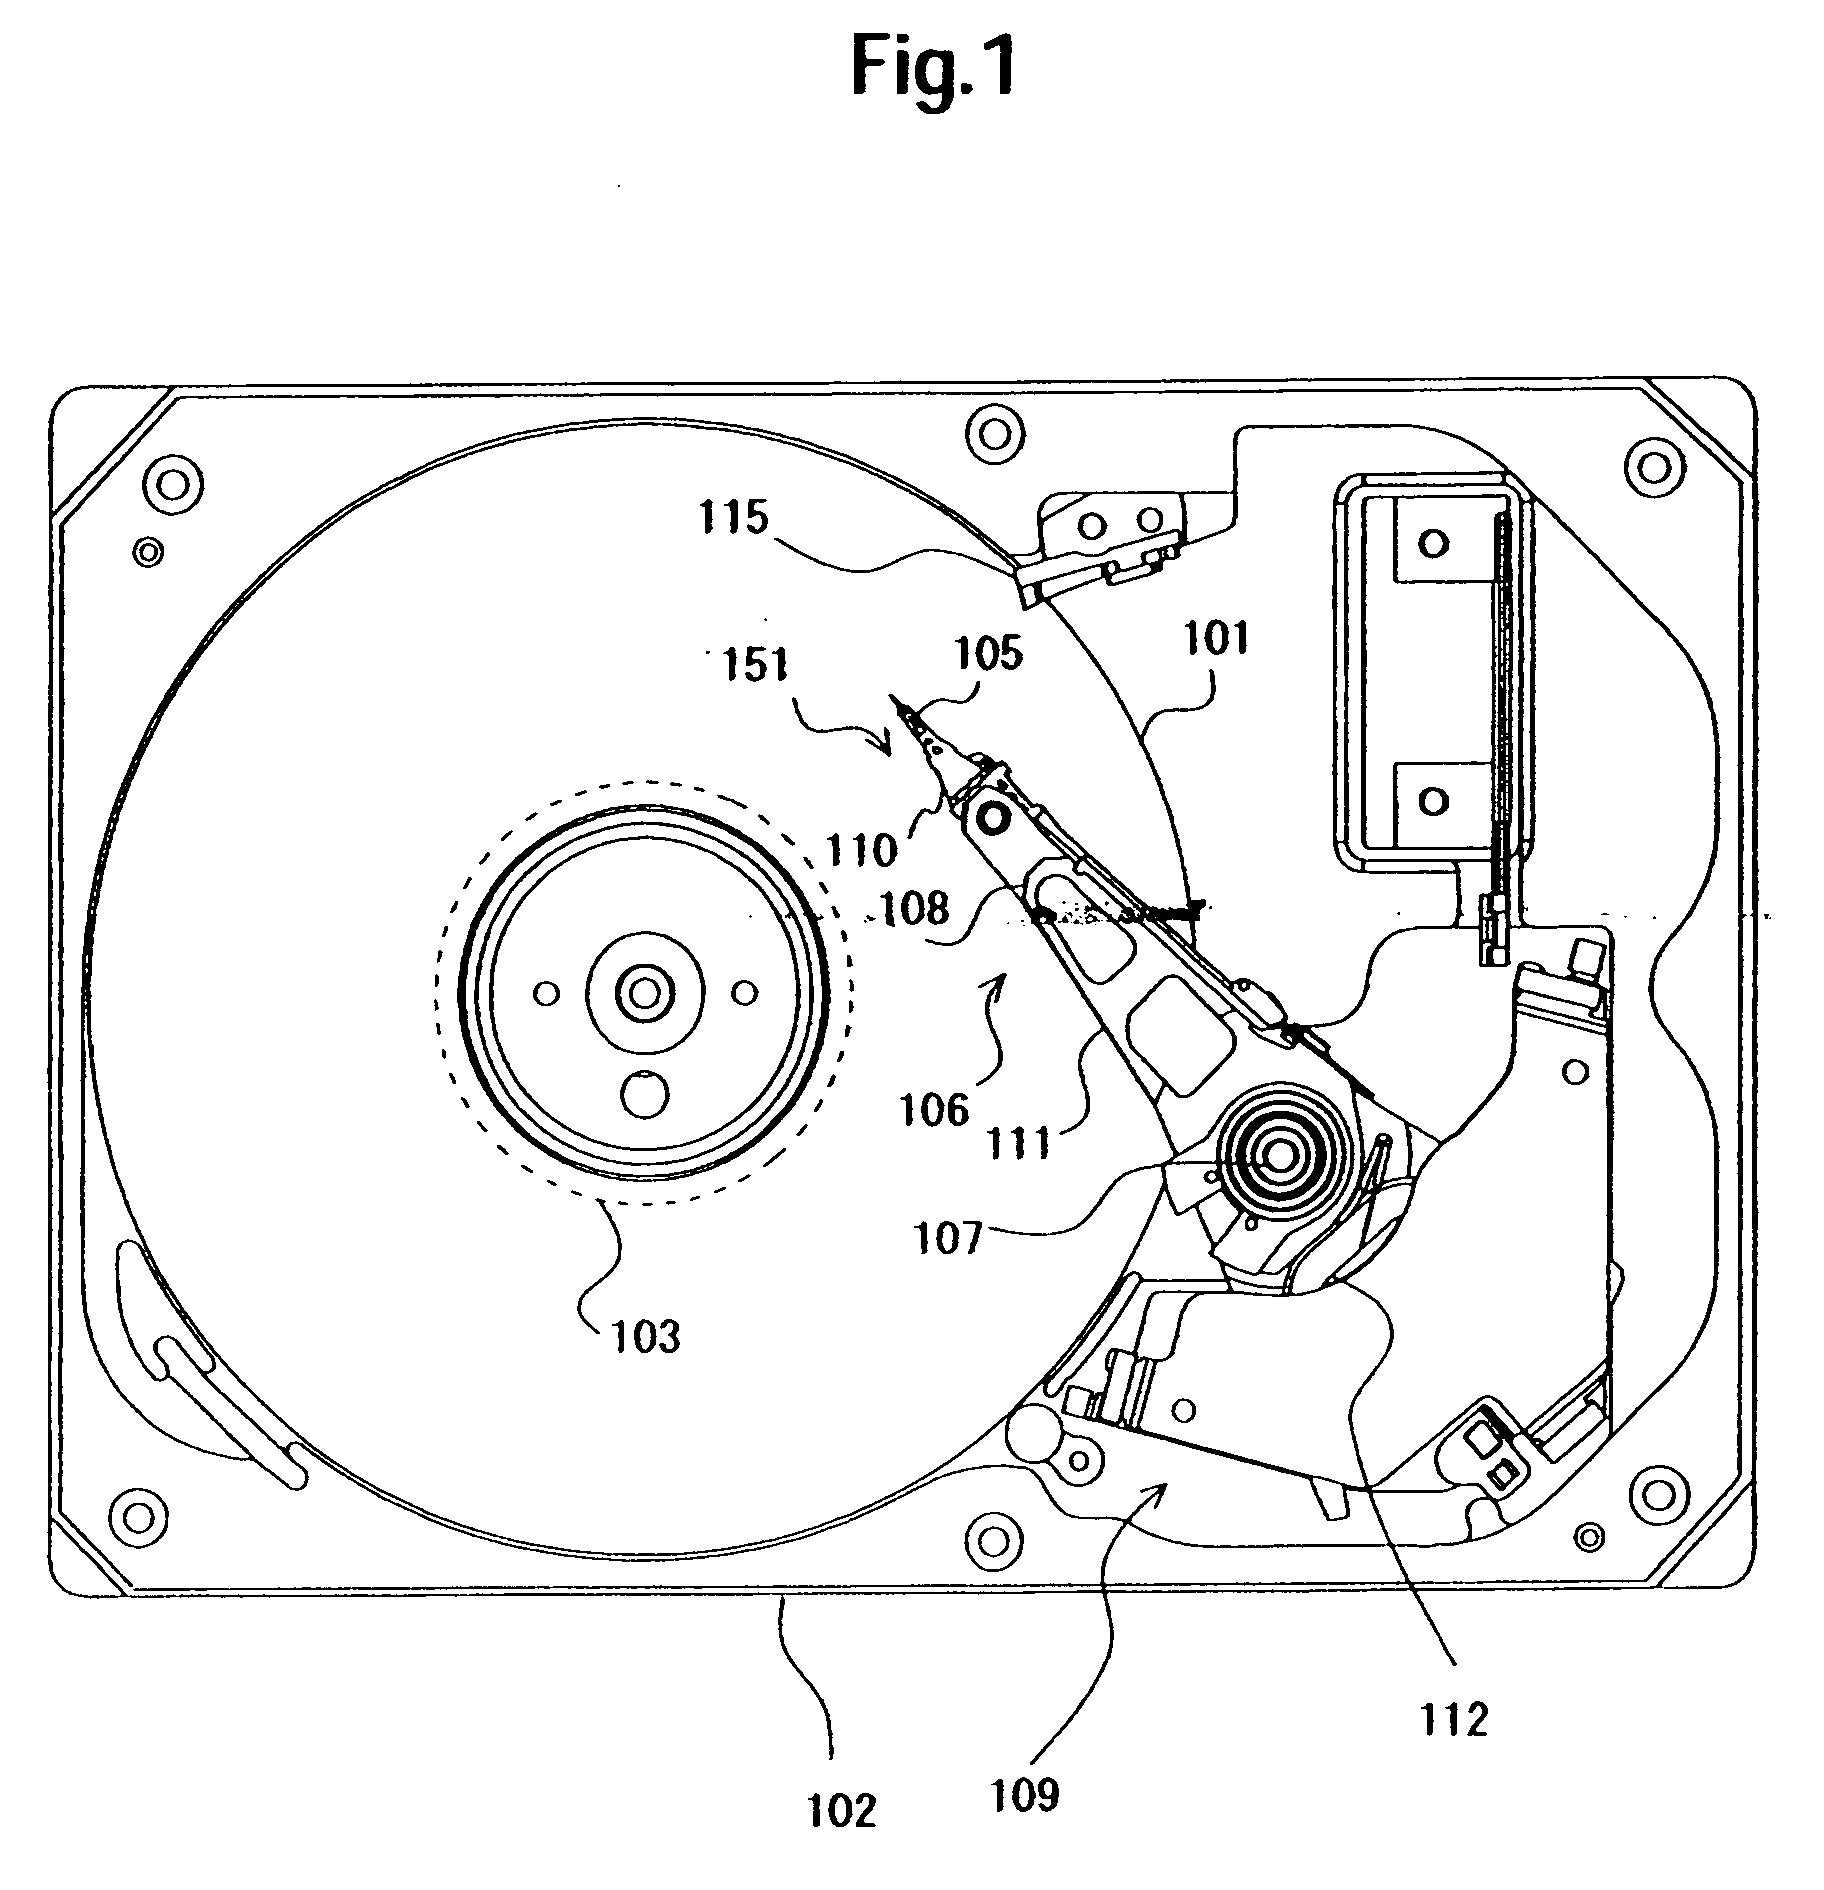 Disk drive device and carriage of actuator used therein